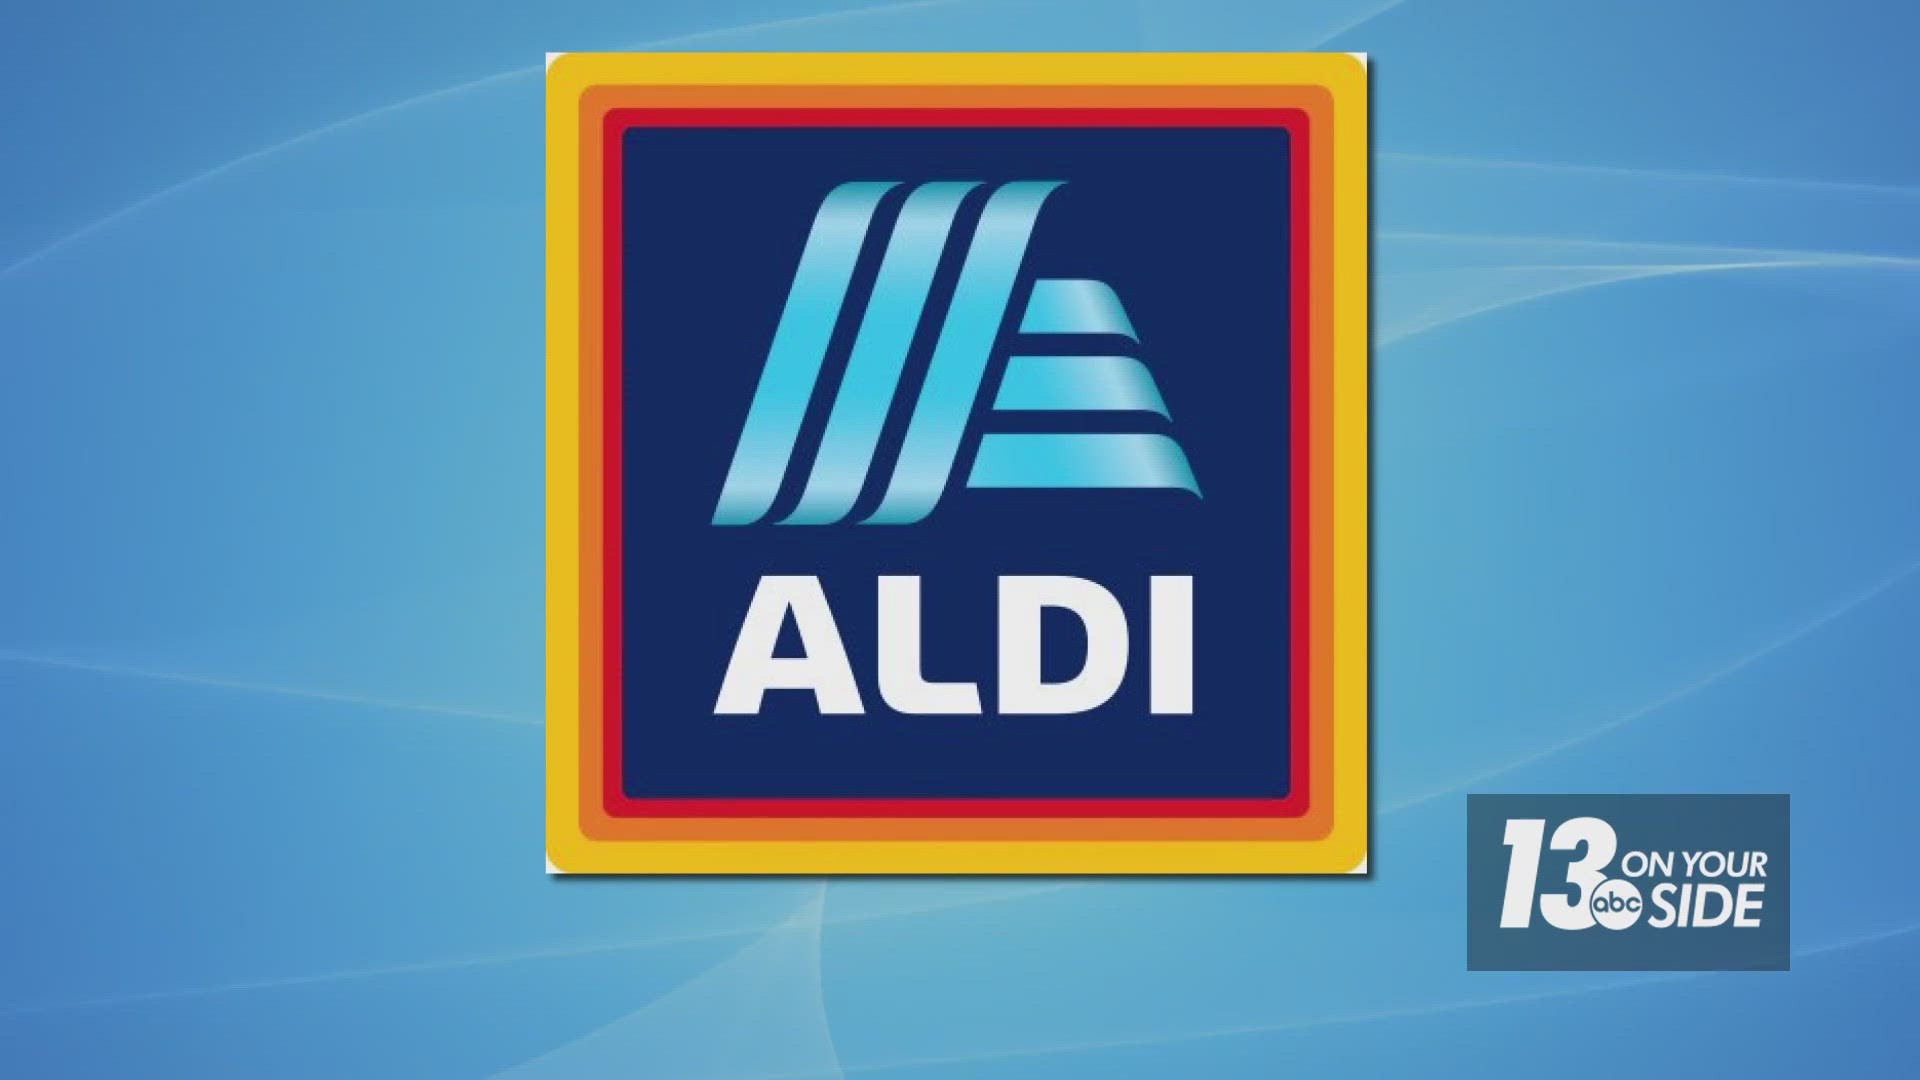 ALDI shoppers are in for a treat this spring, an abundance of fresh produce and fish products.